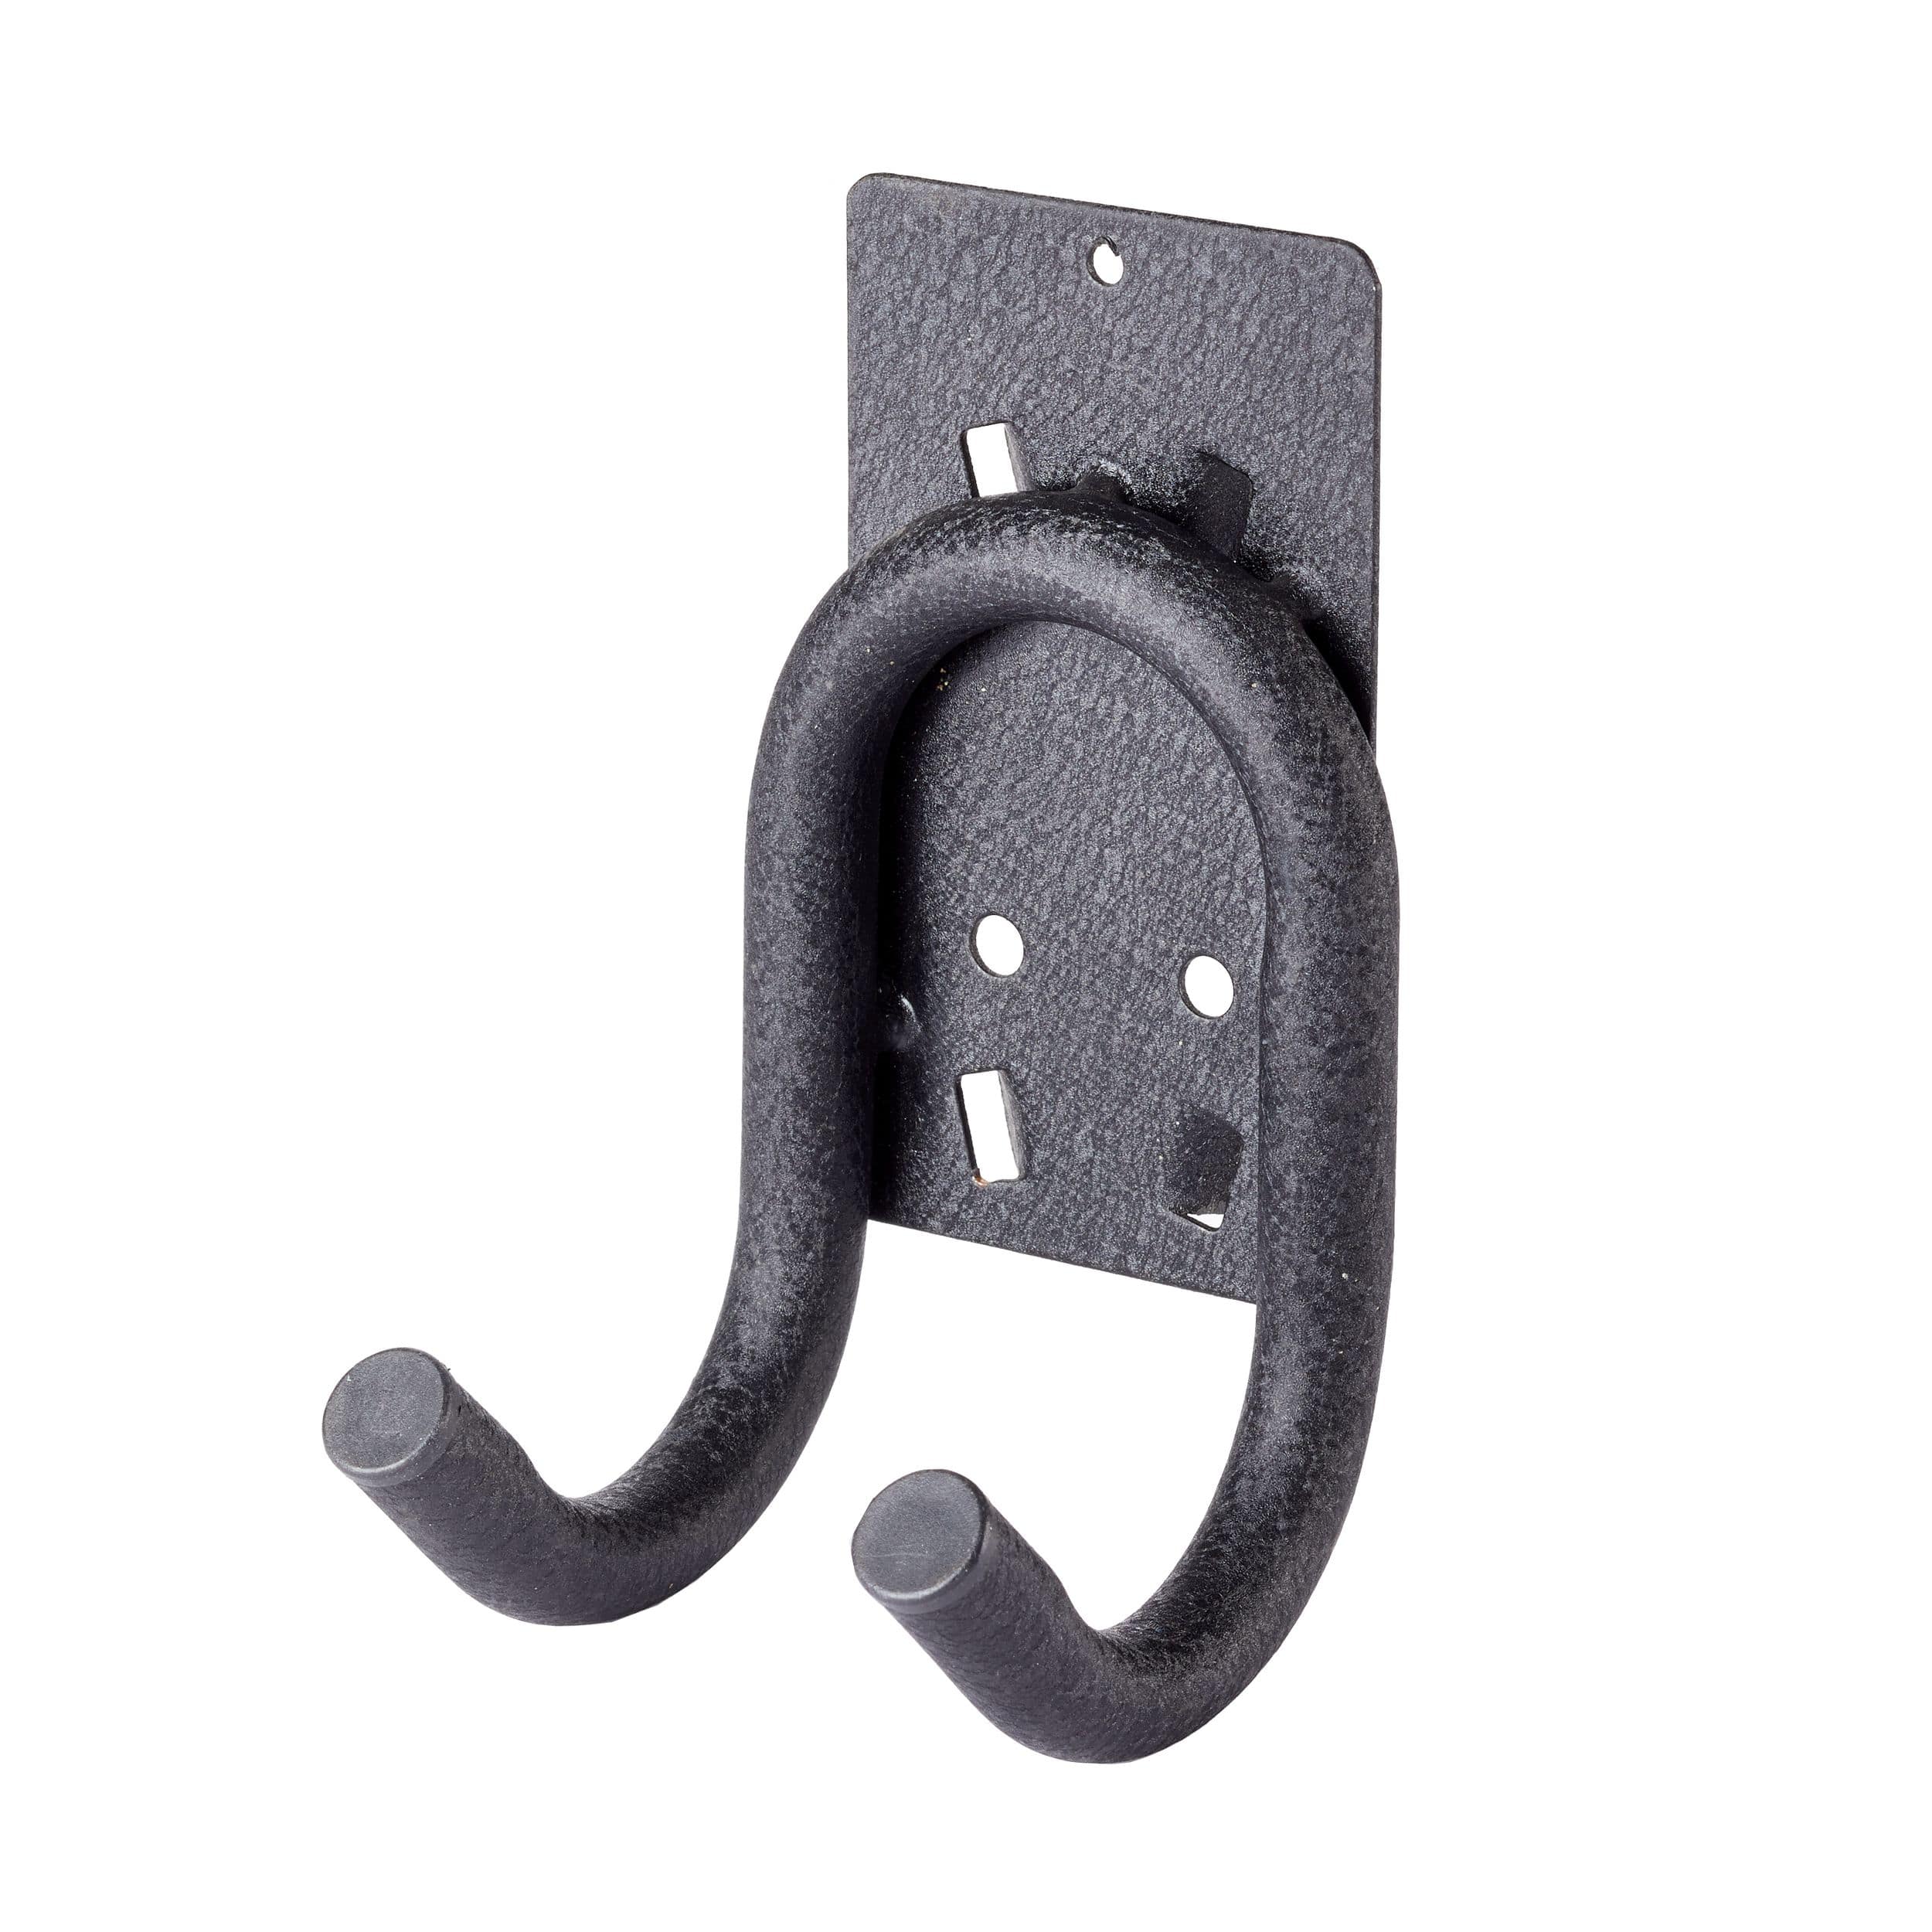  Renovators Supply Bathroom Hooks 2 in. Black Cast Iron Wall  Mount Double Hooks for Hanging Robe, Towel, Hat, with Mounting Hardware :  Home & Kitchen